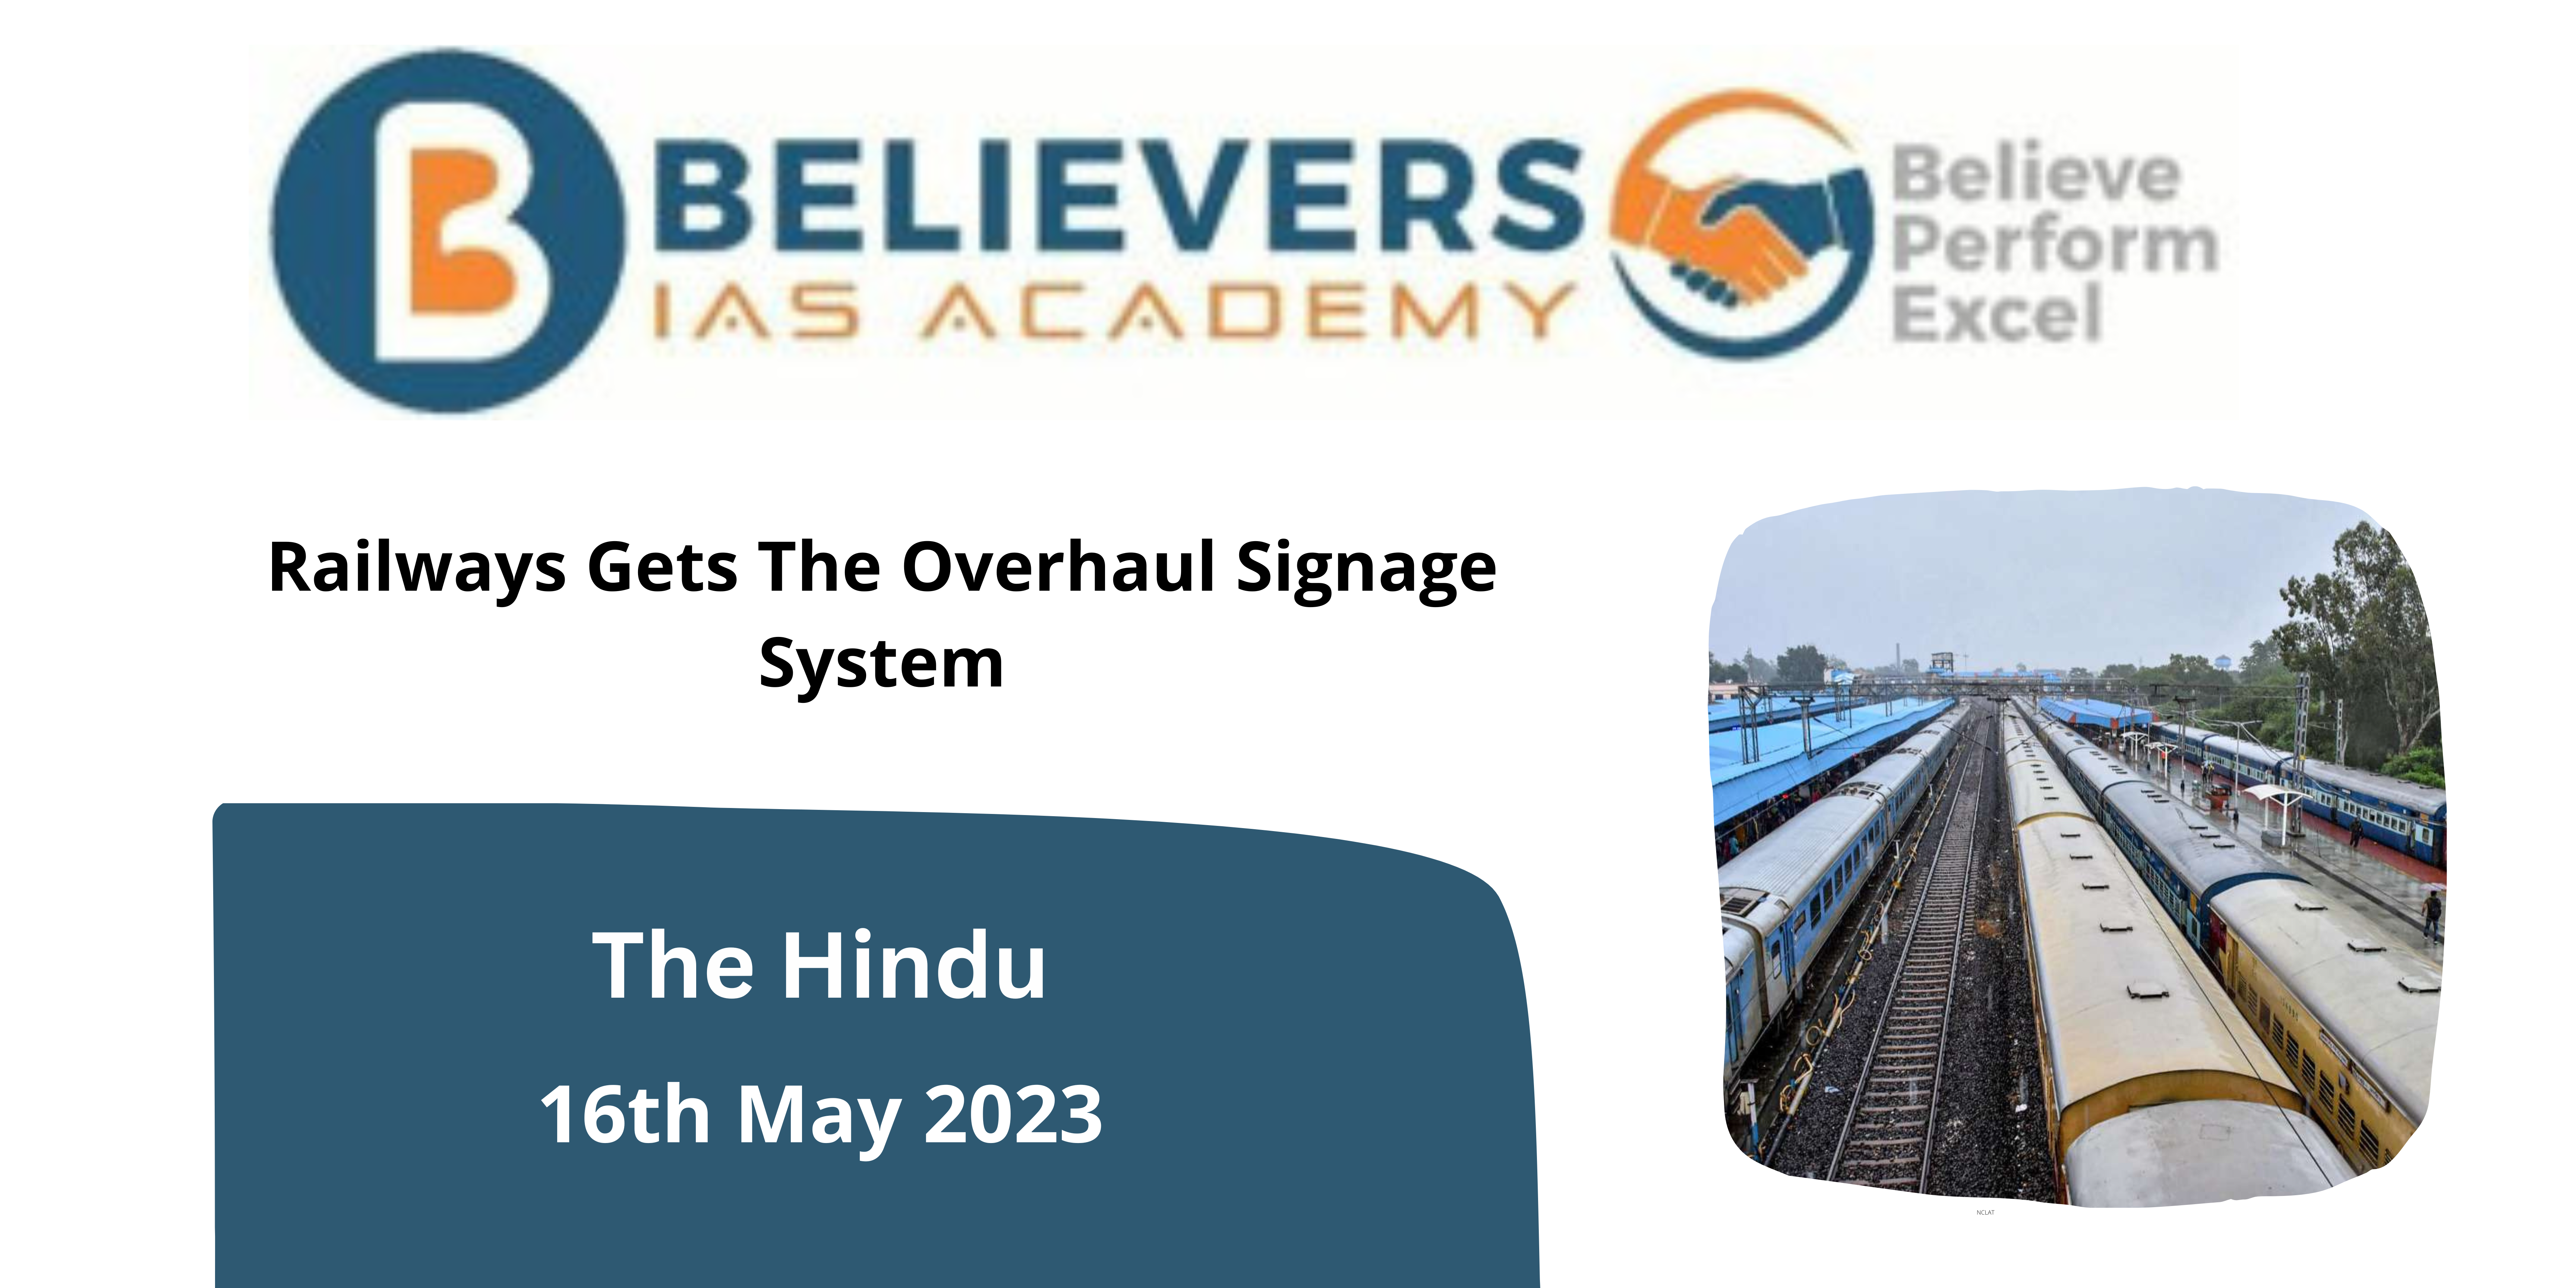 Railways Gets The Overhaul Signage System